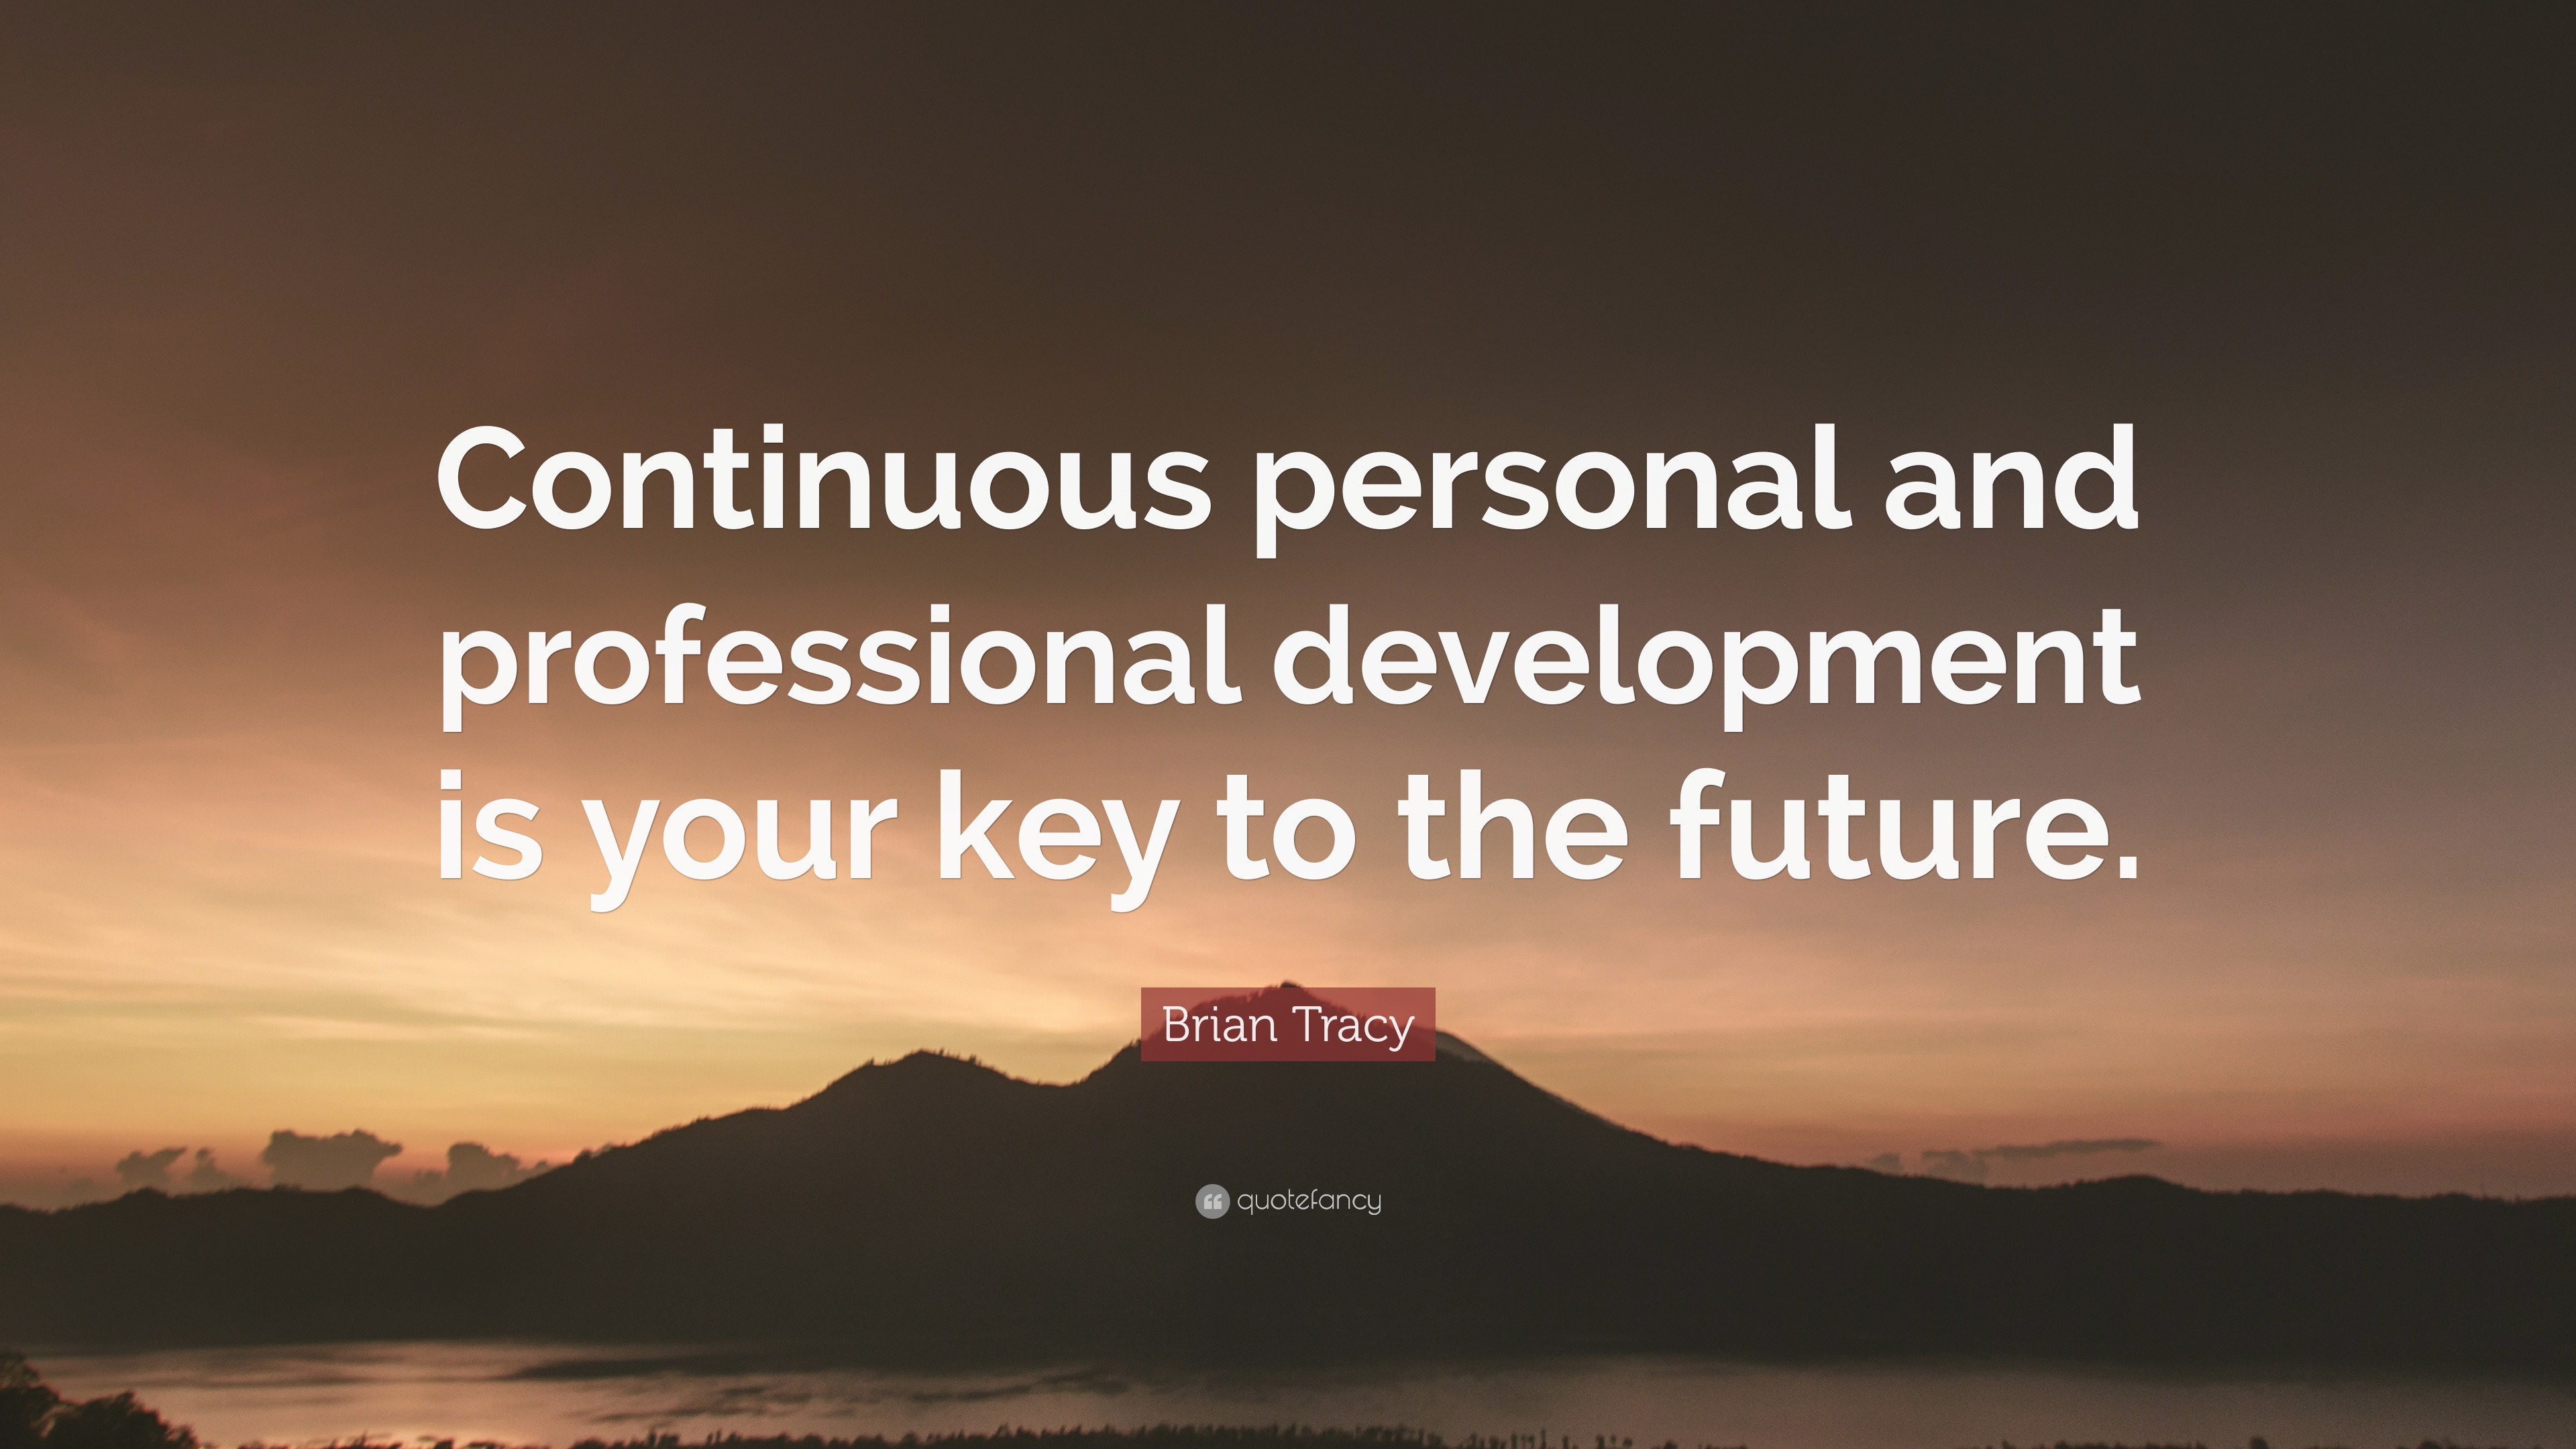 Brian Tracy Quote “Continuous personal and professional